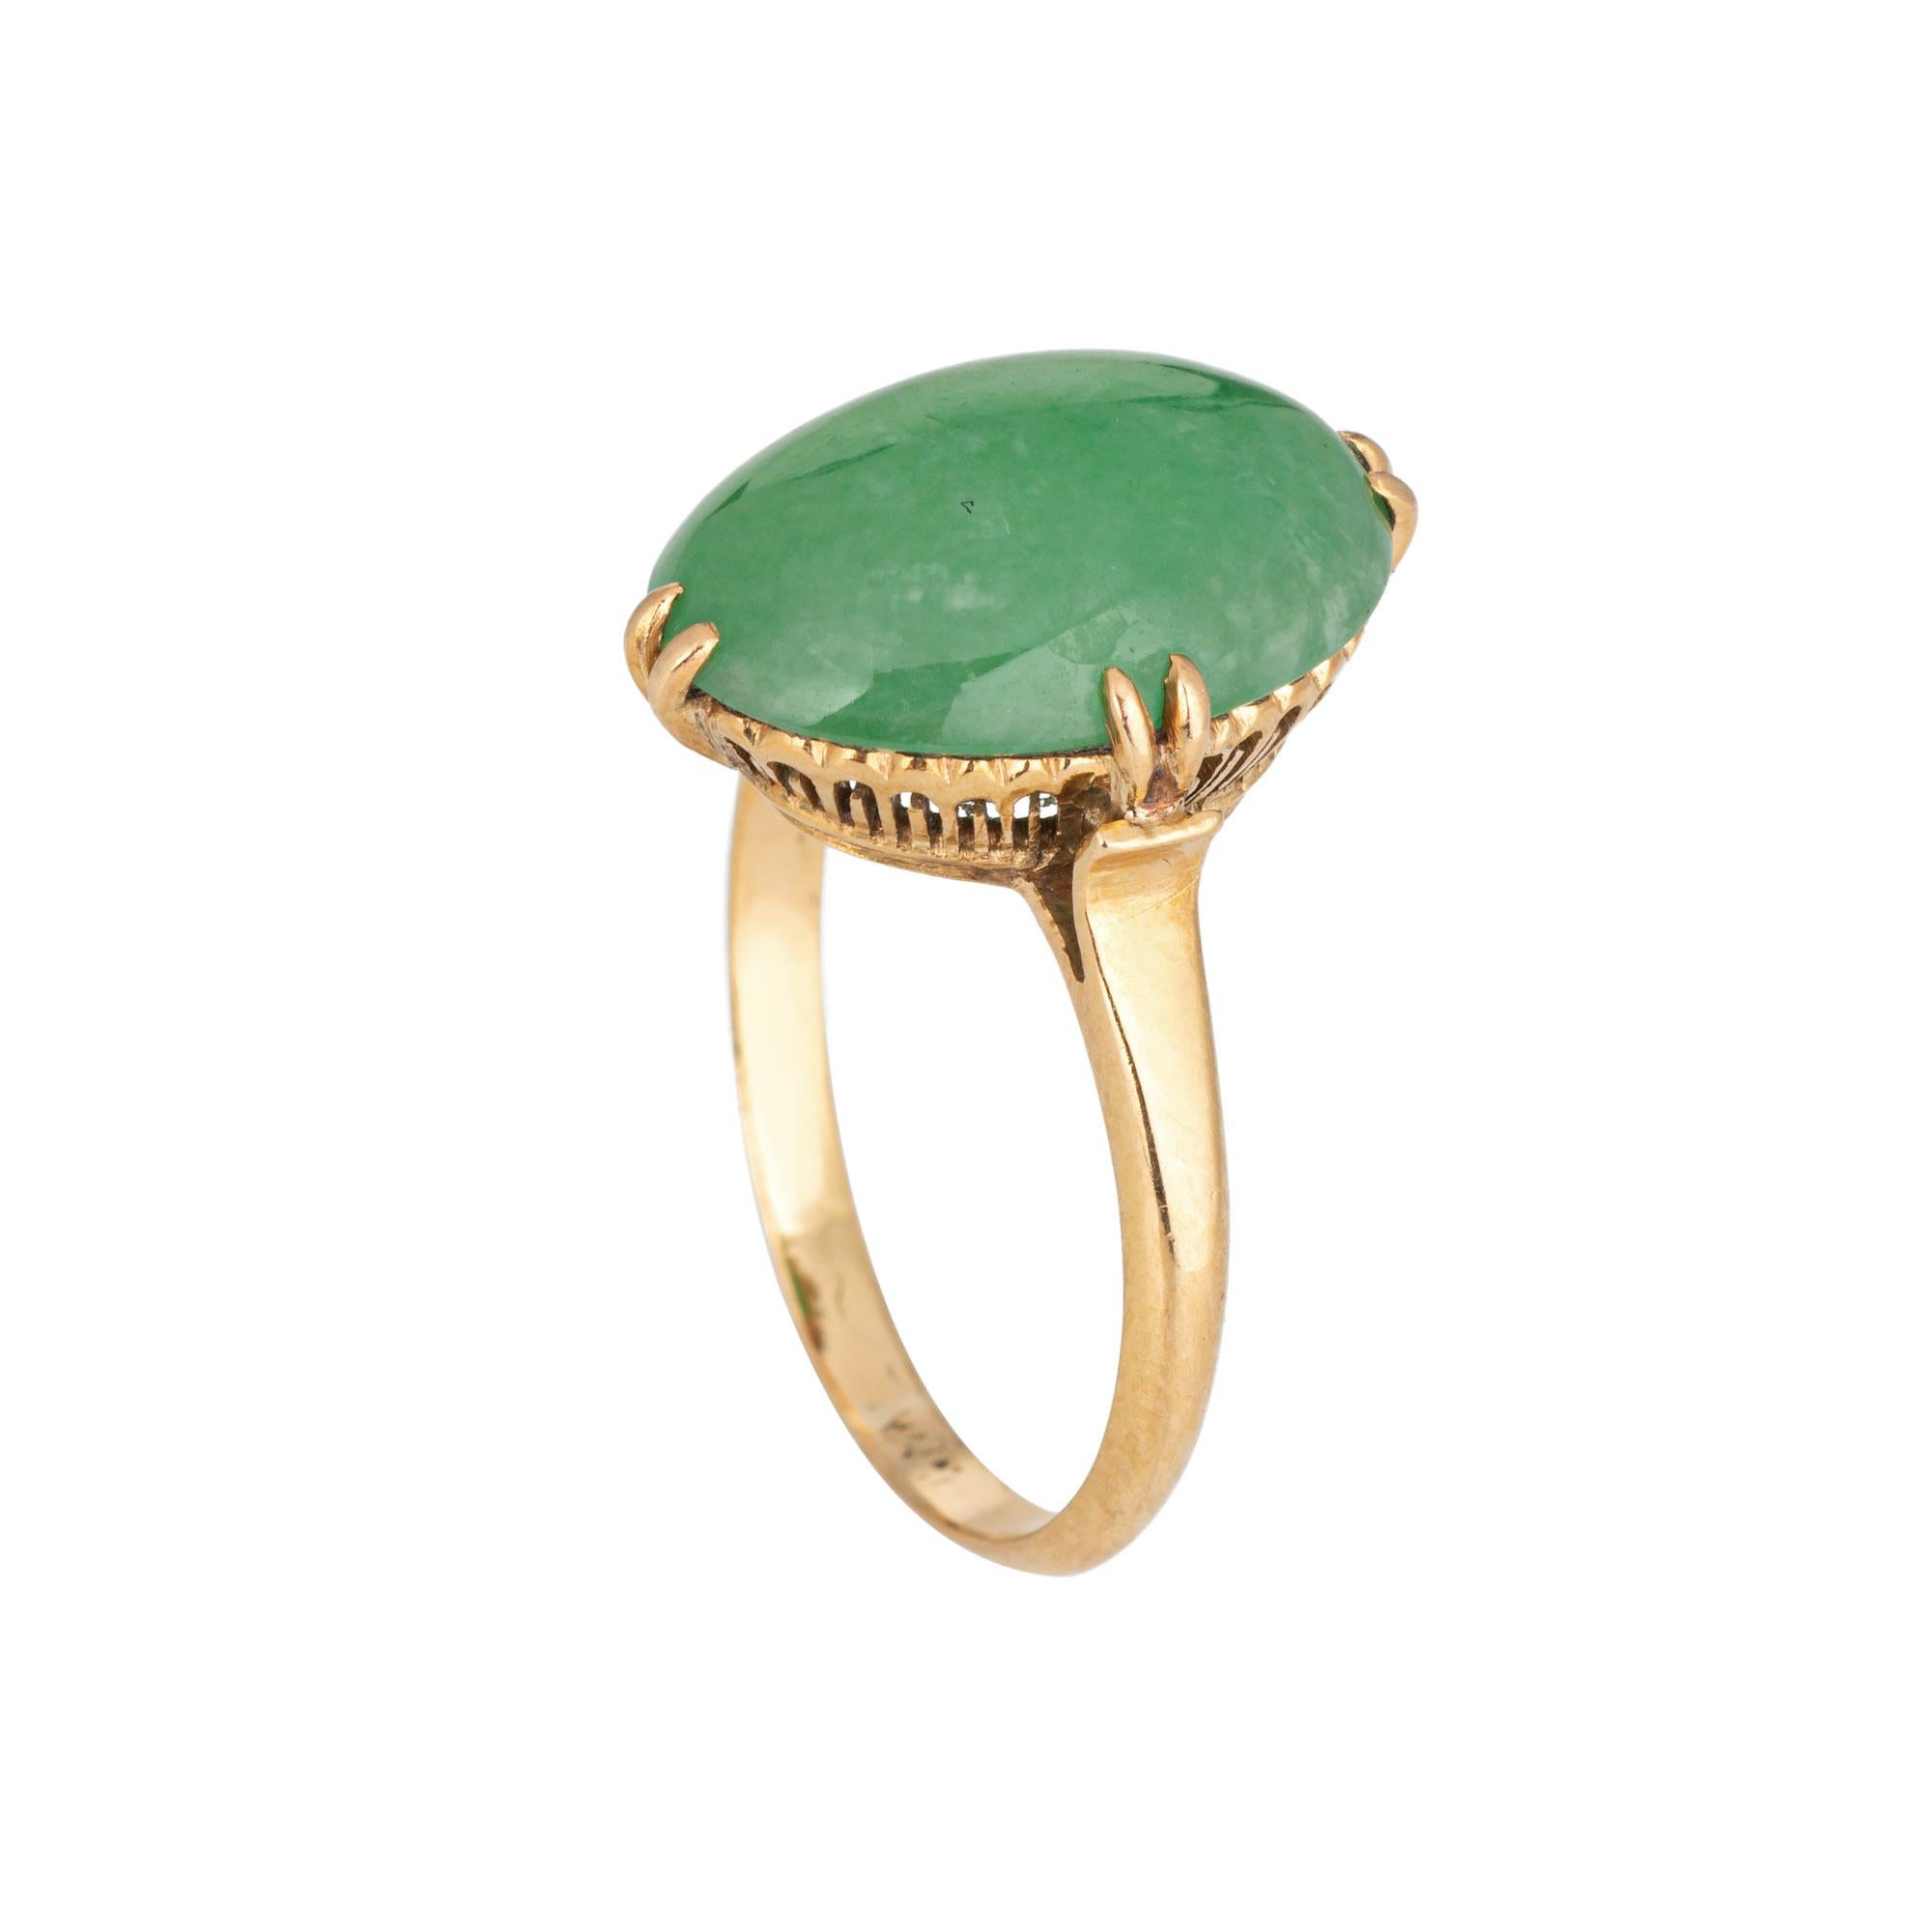 Stylish vintage jade ring (circa 1950s to 1960s) crafted in 14 karat yellow gold. 

Jade measures 14mm x 9.5mm. The jade is in good condition and free of cracks or chips. 

The oval mount highlights beautiful green jade. Measuring just over 1/2 inch